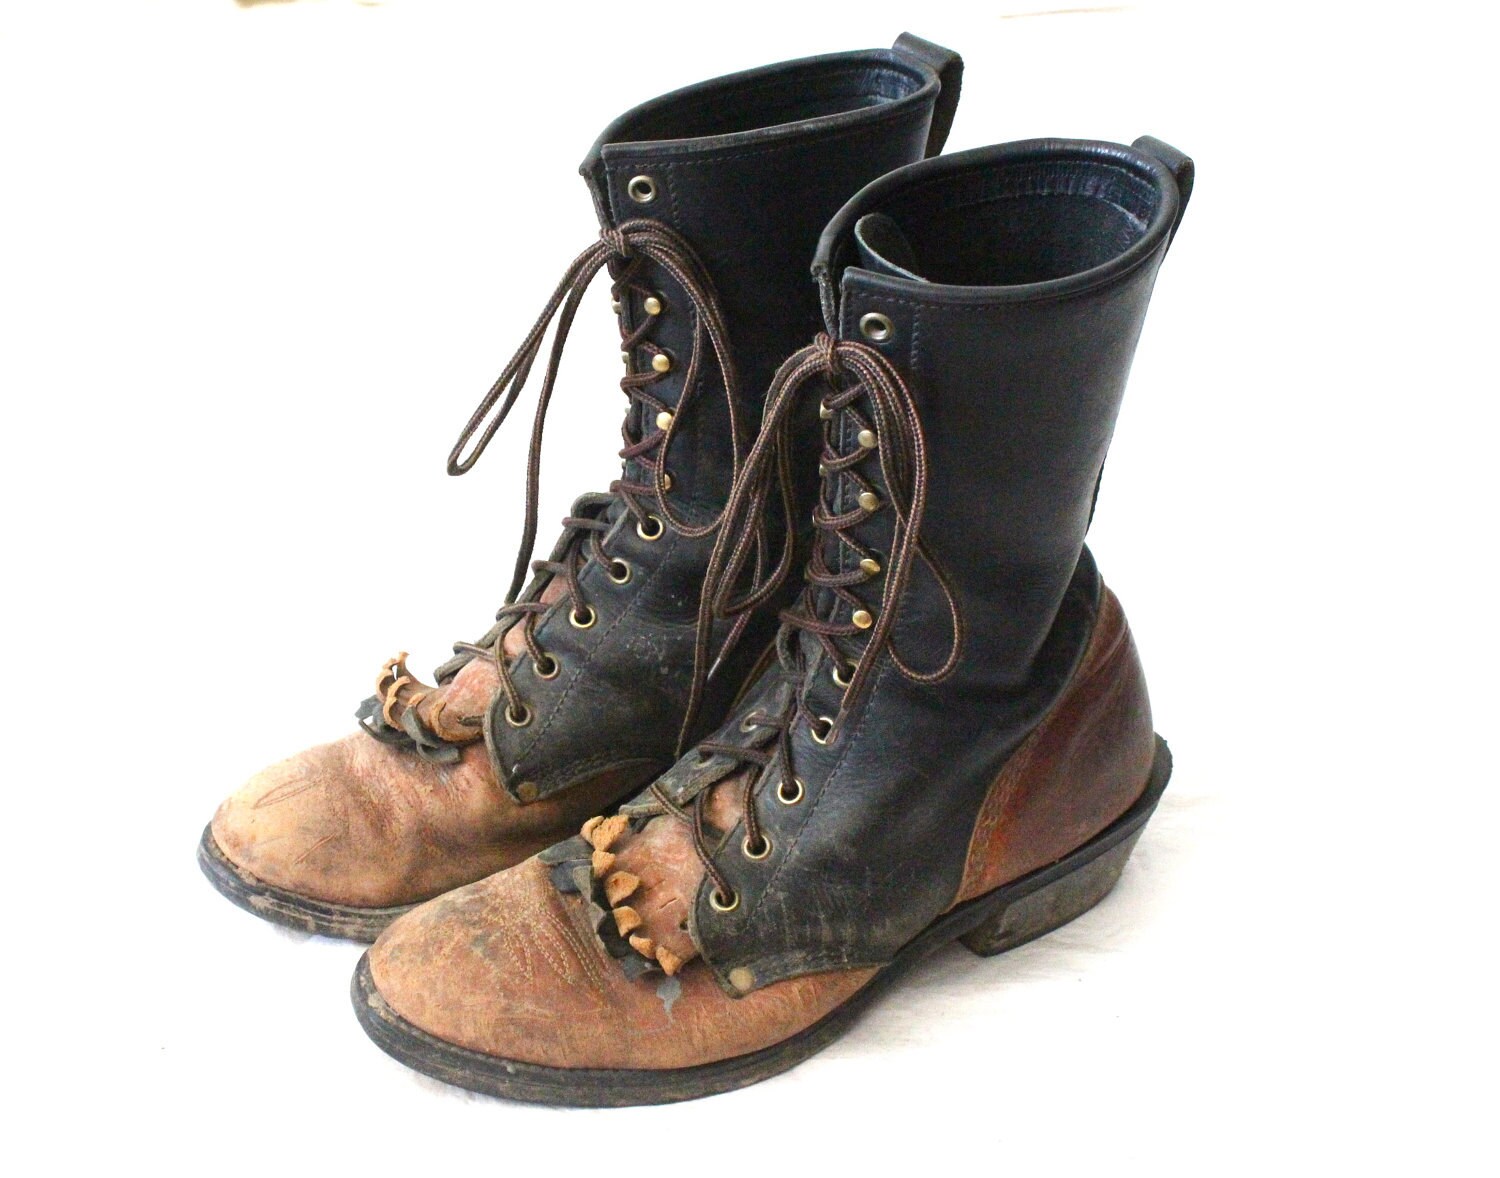 Vintage 2 Tone Rustic Leather Lace Up Boots Western Urban